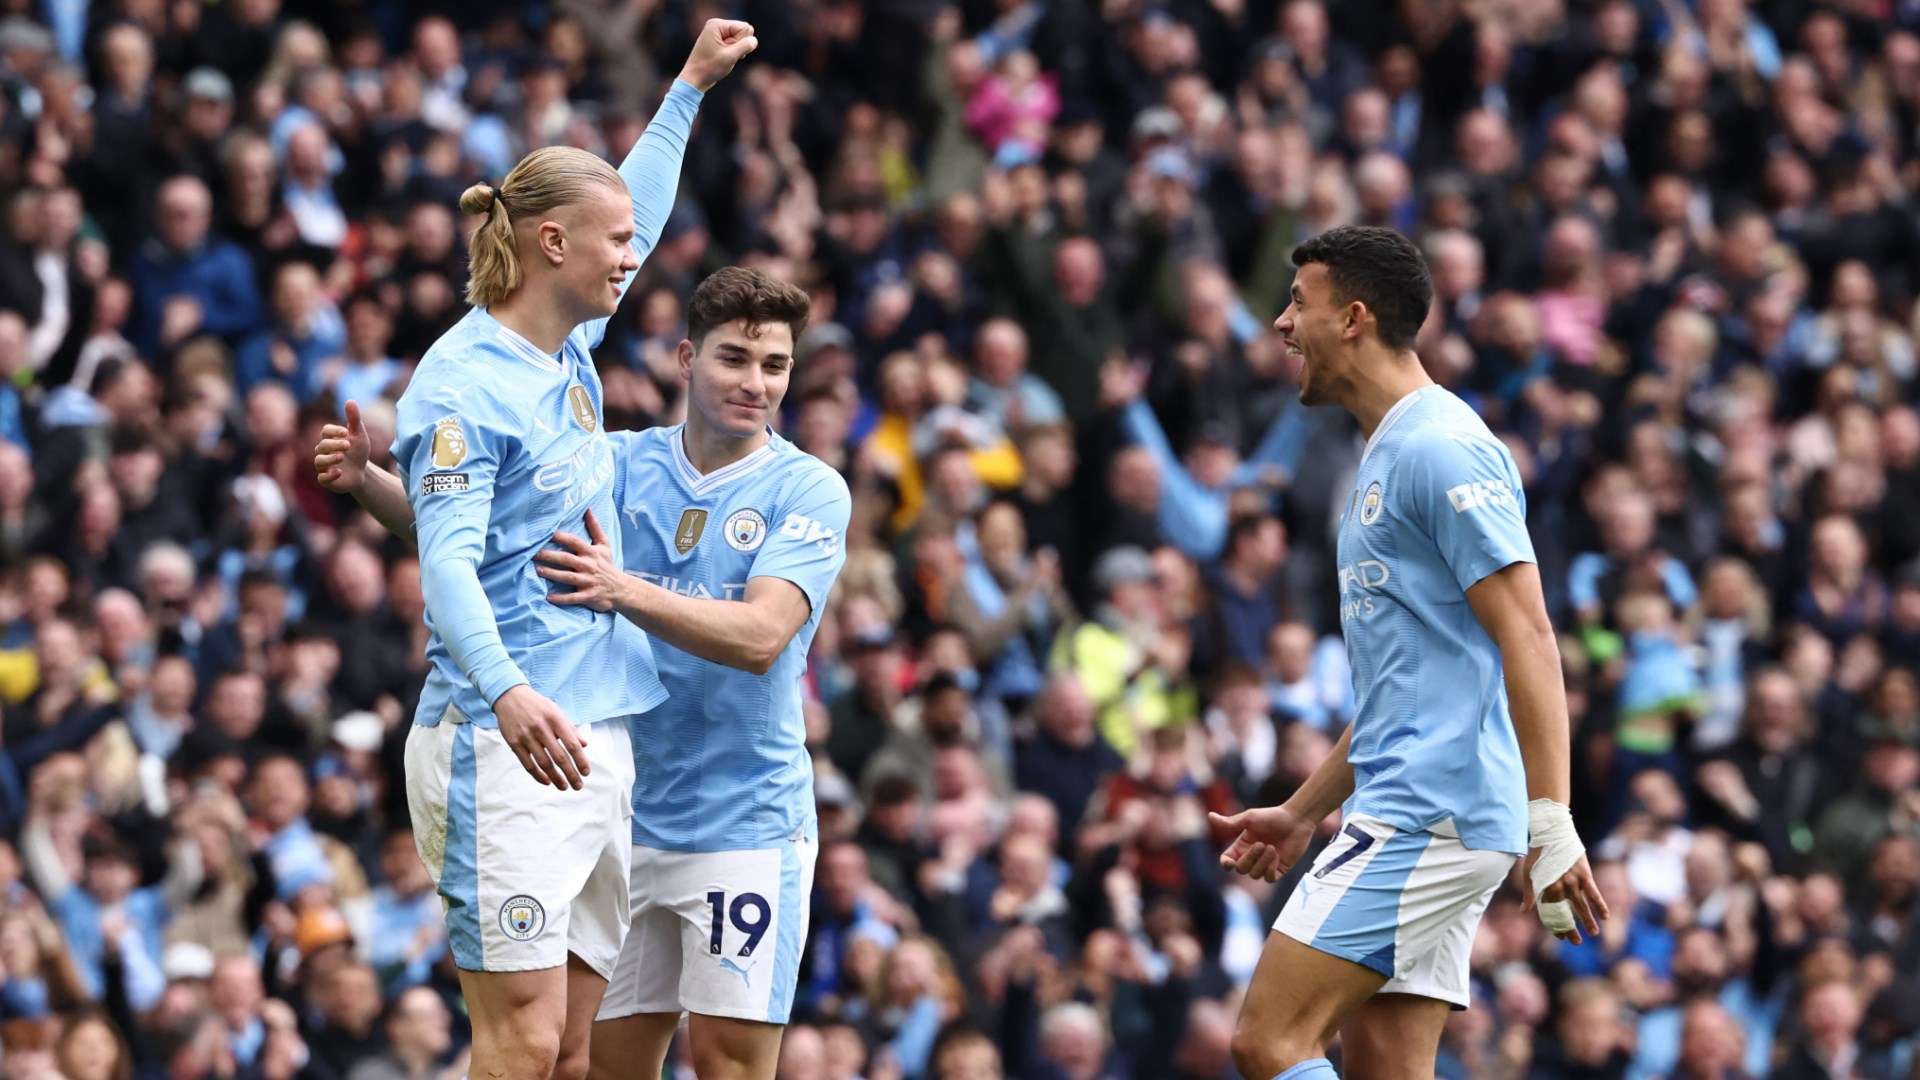 Man City celebrating Erling Haaland early goal for Man City against Luton